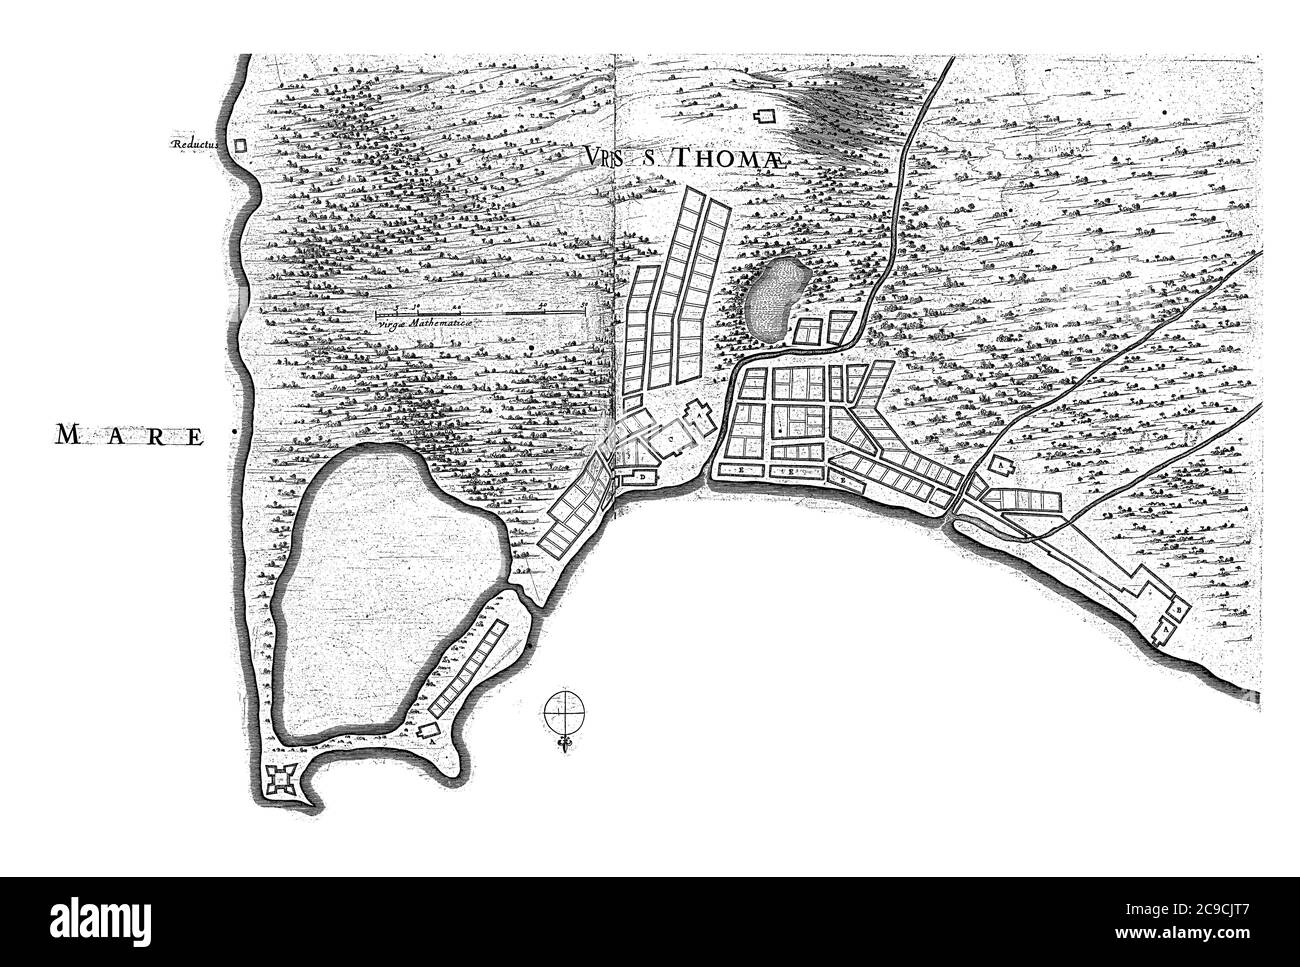 Map of the city of Sao Tome on the island of Sao Tome, The island has been conquered by a Dutch fleet of the WIC commanded by Cornelis Cornelisz Jol, Stock Photo